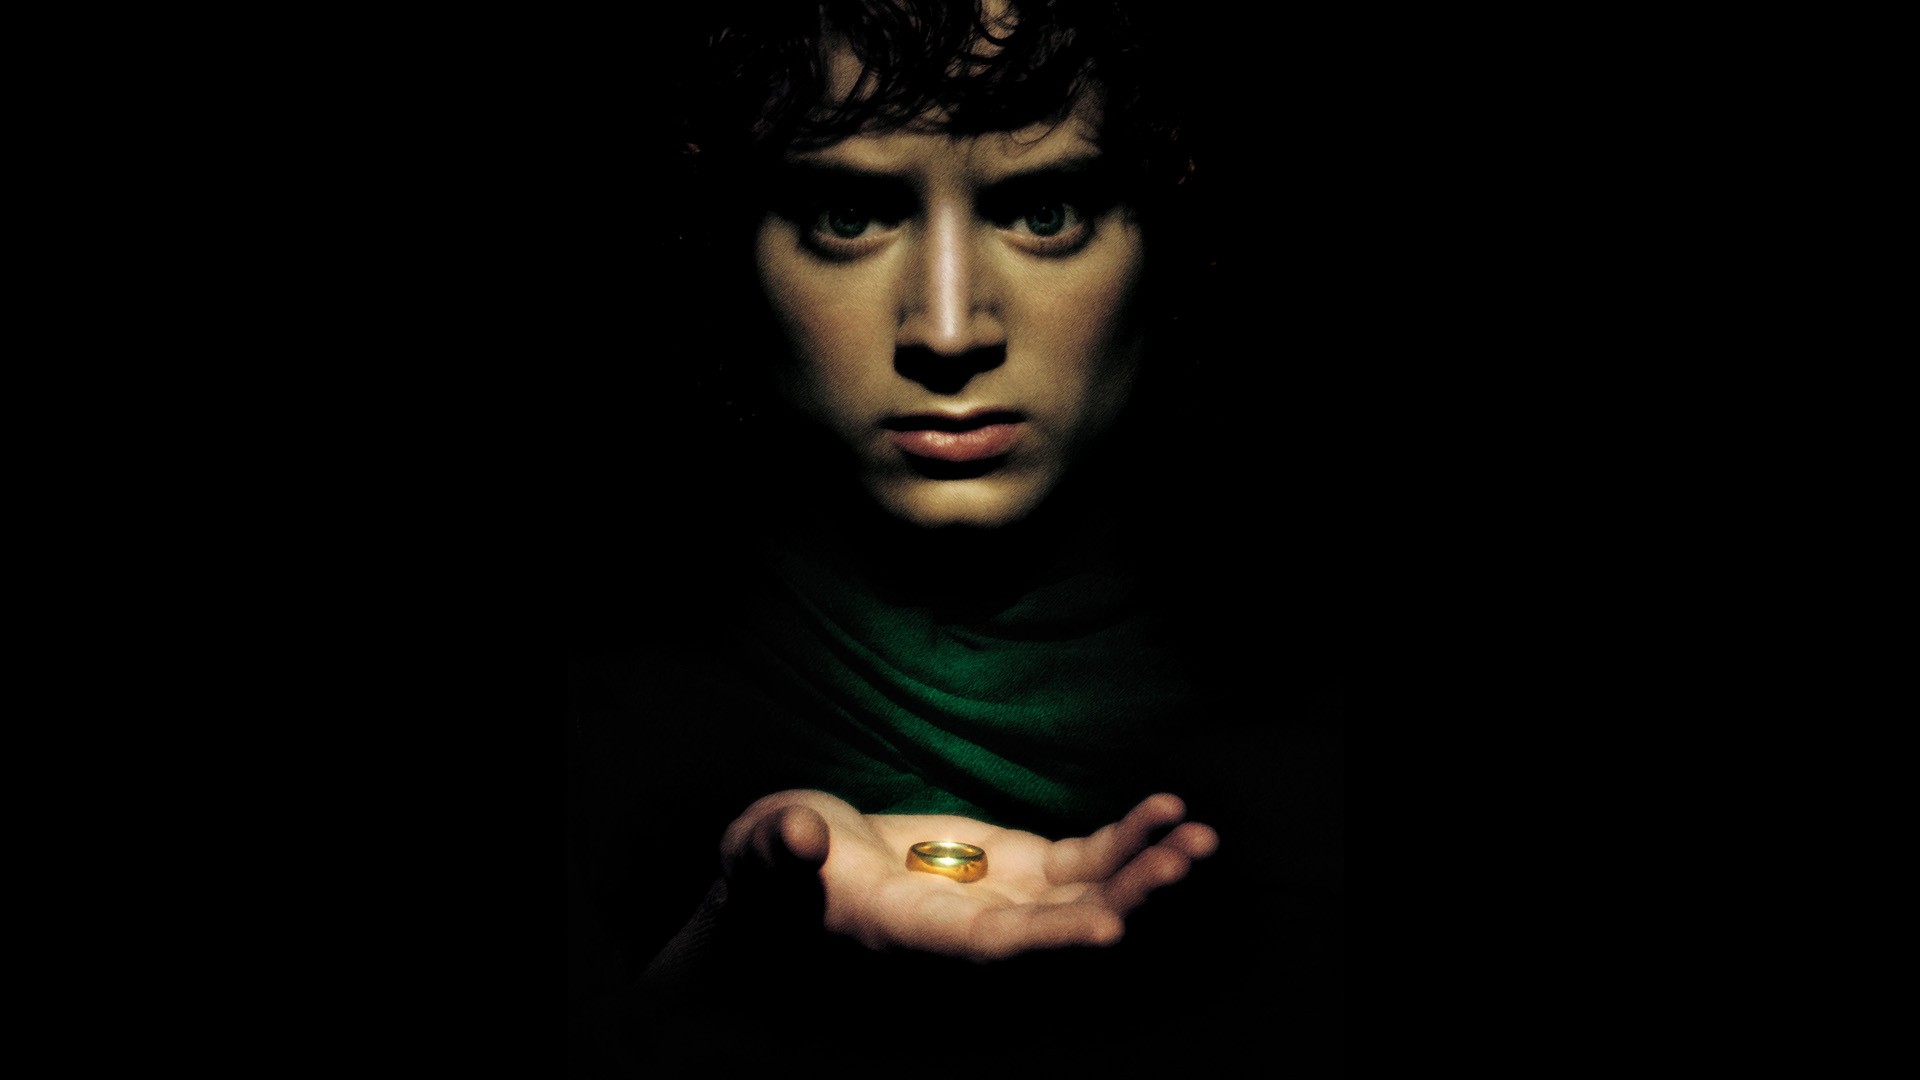 General 1920x1080 movies The Lord of the Rings The Lord of the Rings: The Fellowship of the Ring Frodo Baggins Elijah Wood black actor J. R. R. Tolkien Peter Jackson Book characters